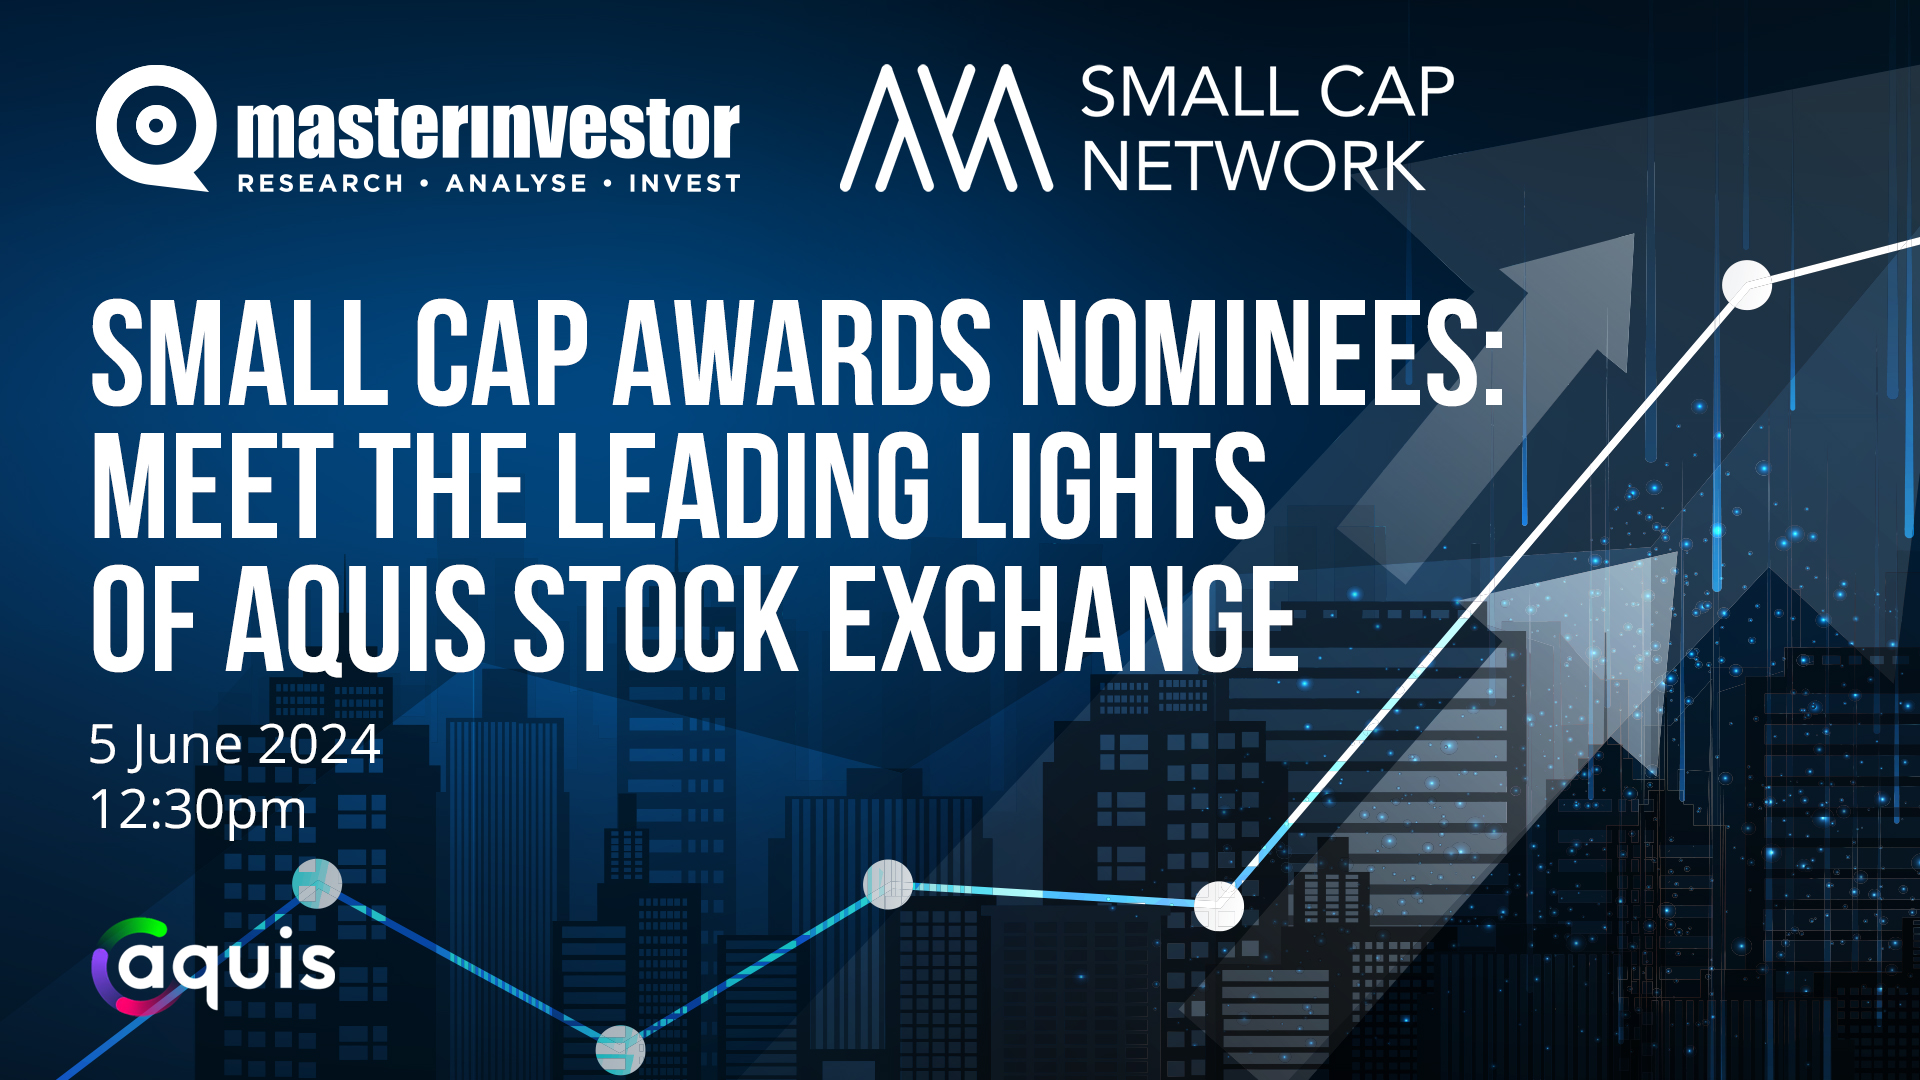 Small Cap Awards Nominees: Meet the Leading Lights of Aquis Stock Exchange